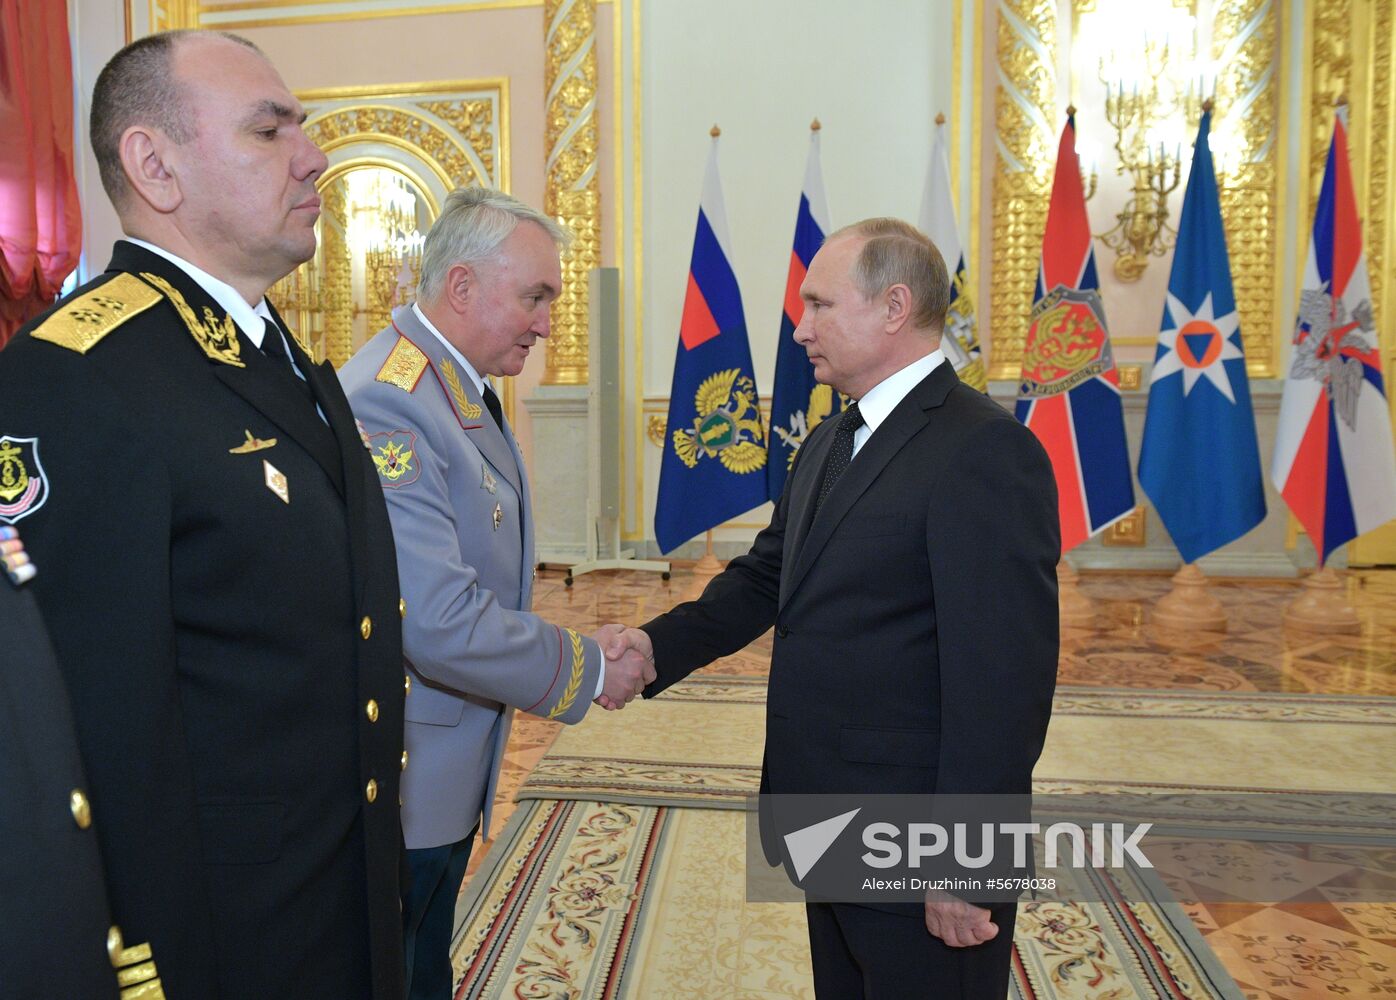 President Putin attends ceremony to present officers appointed to higher positions